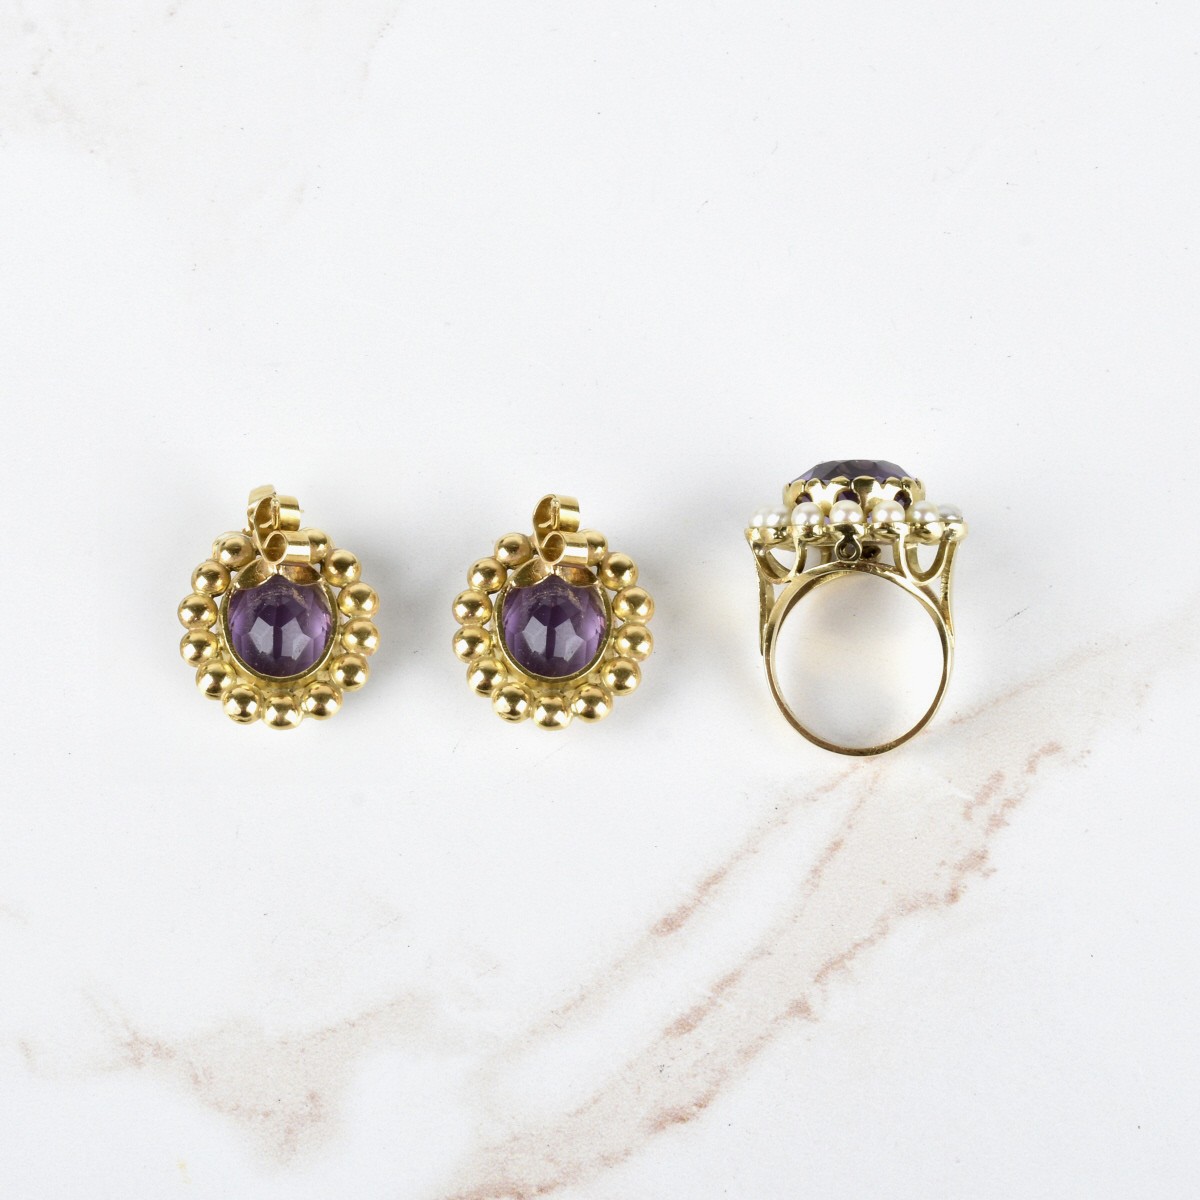 Amethyst, Pearl and 18K Ring and Earrings